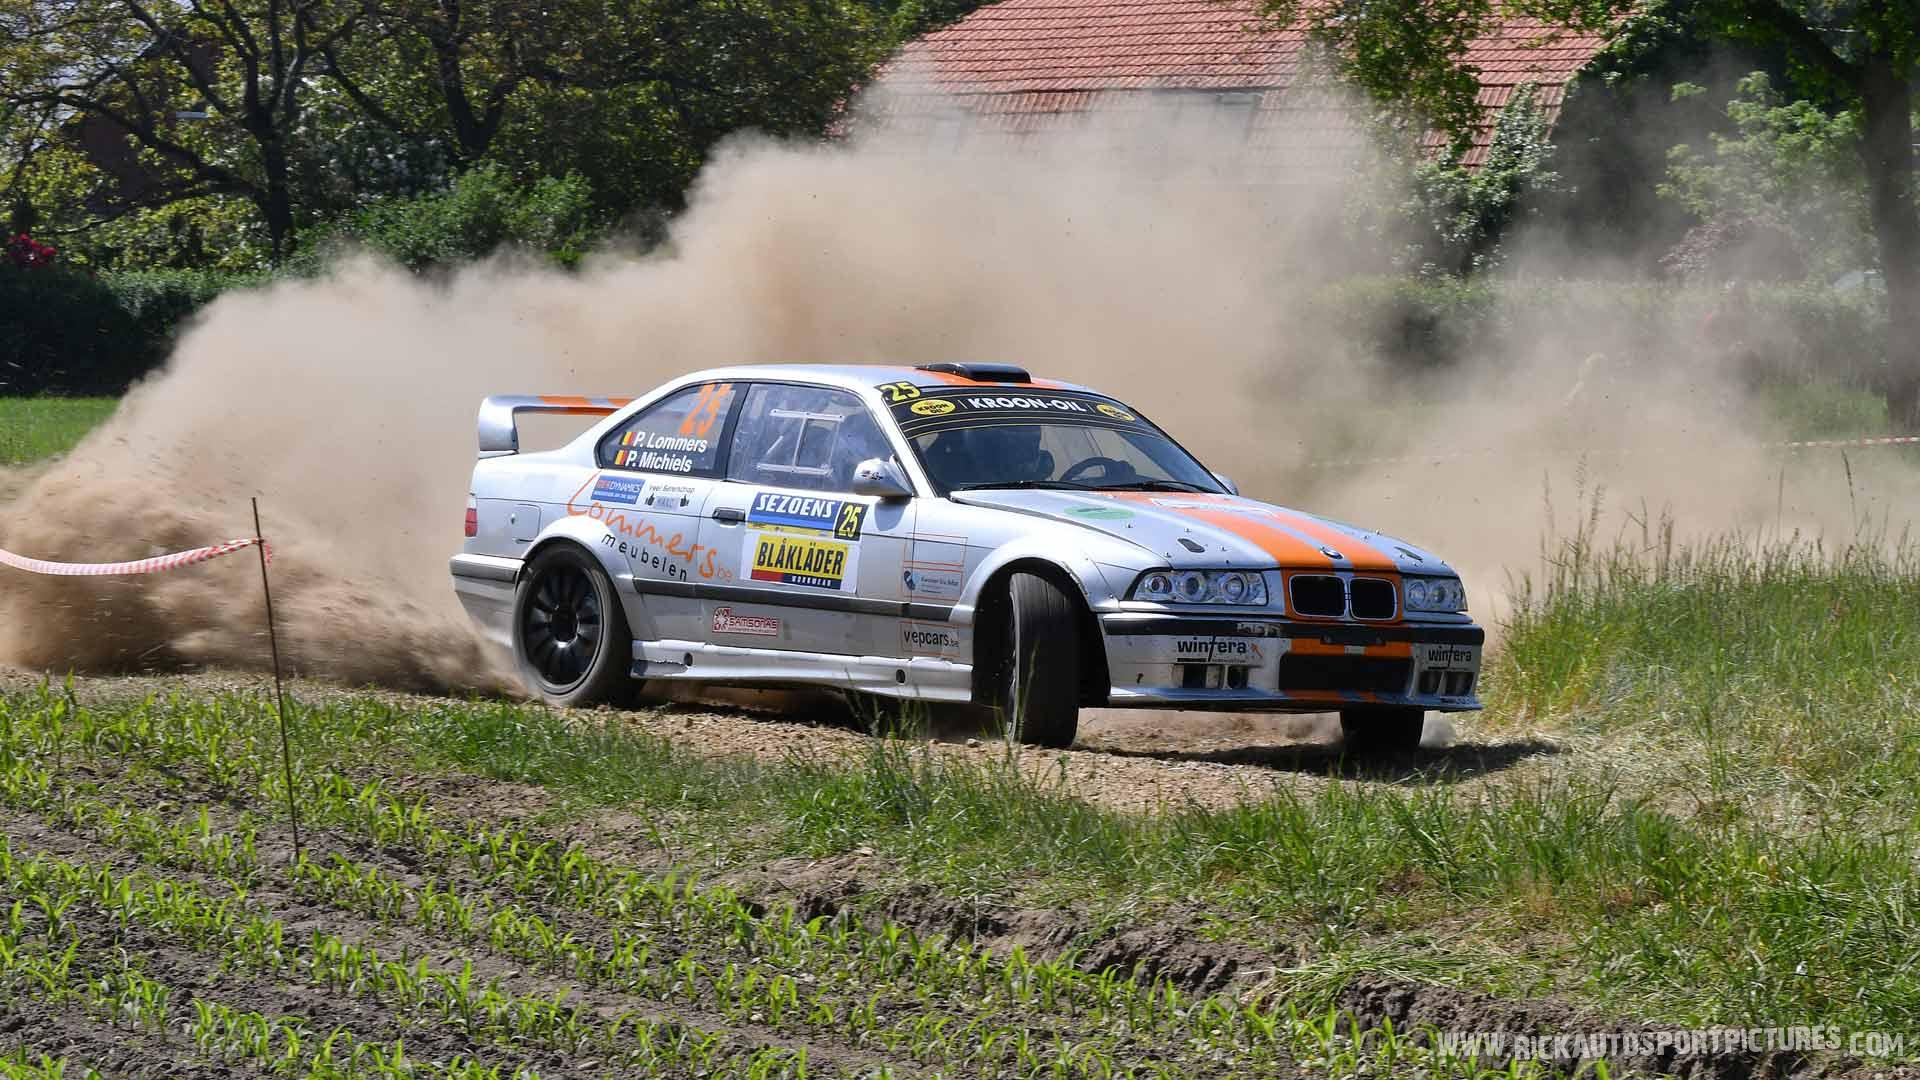 Philip Lommers & Peter Michiels bmw sezoens rally 2022